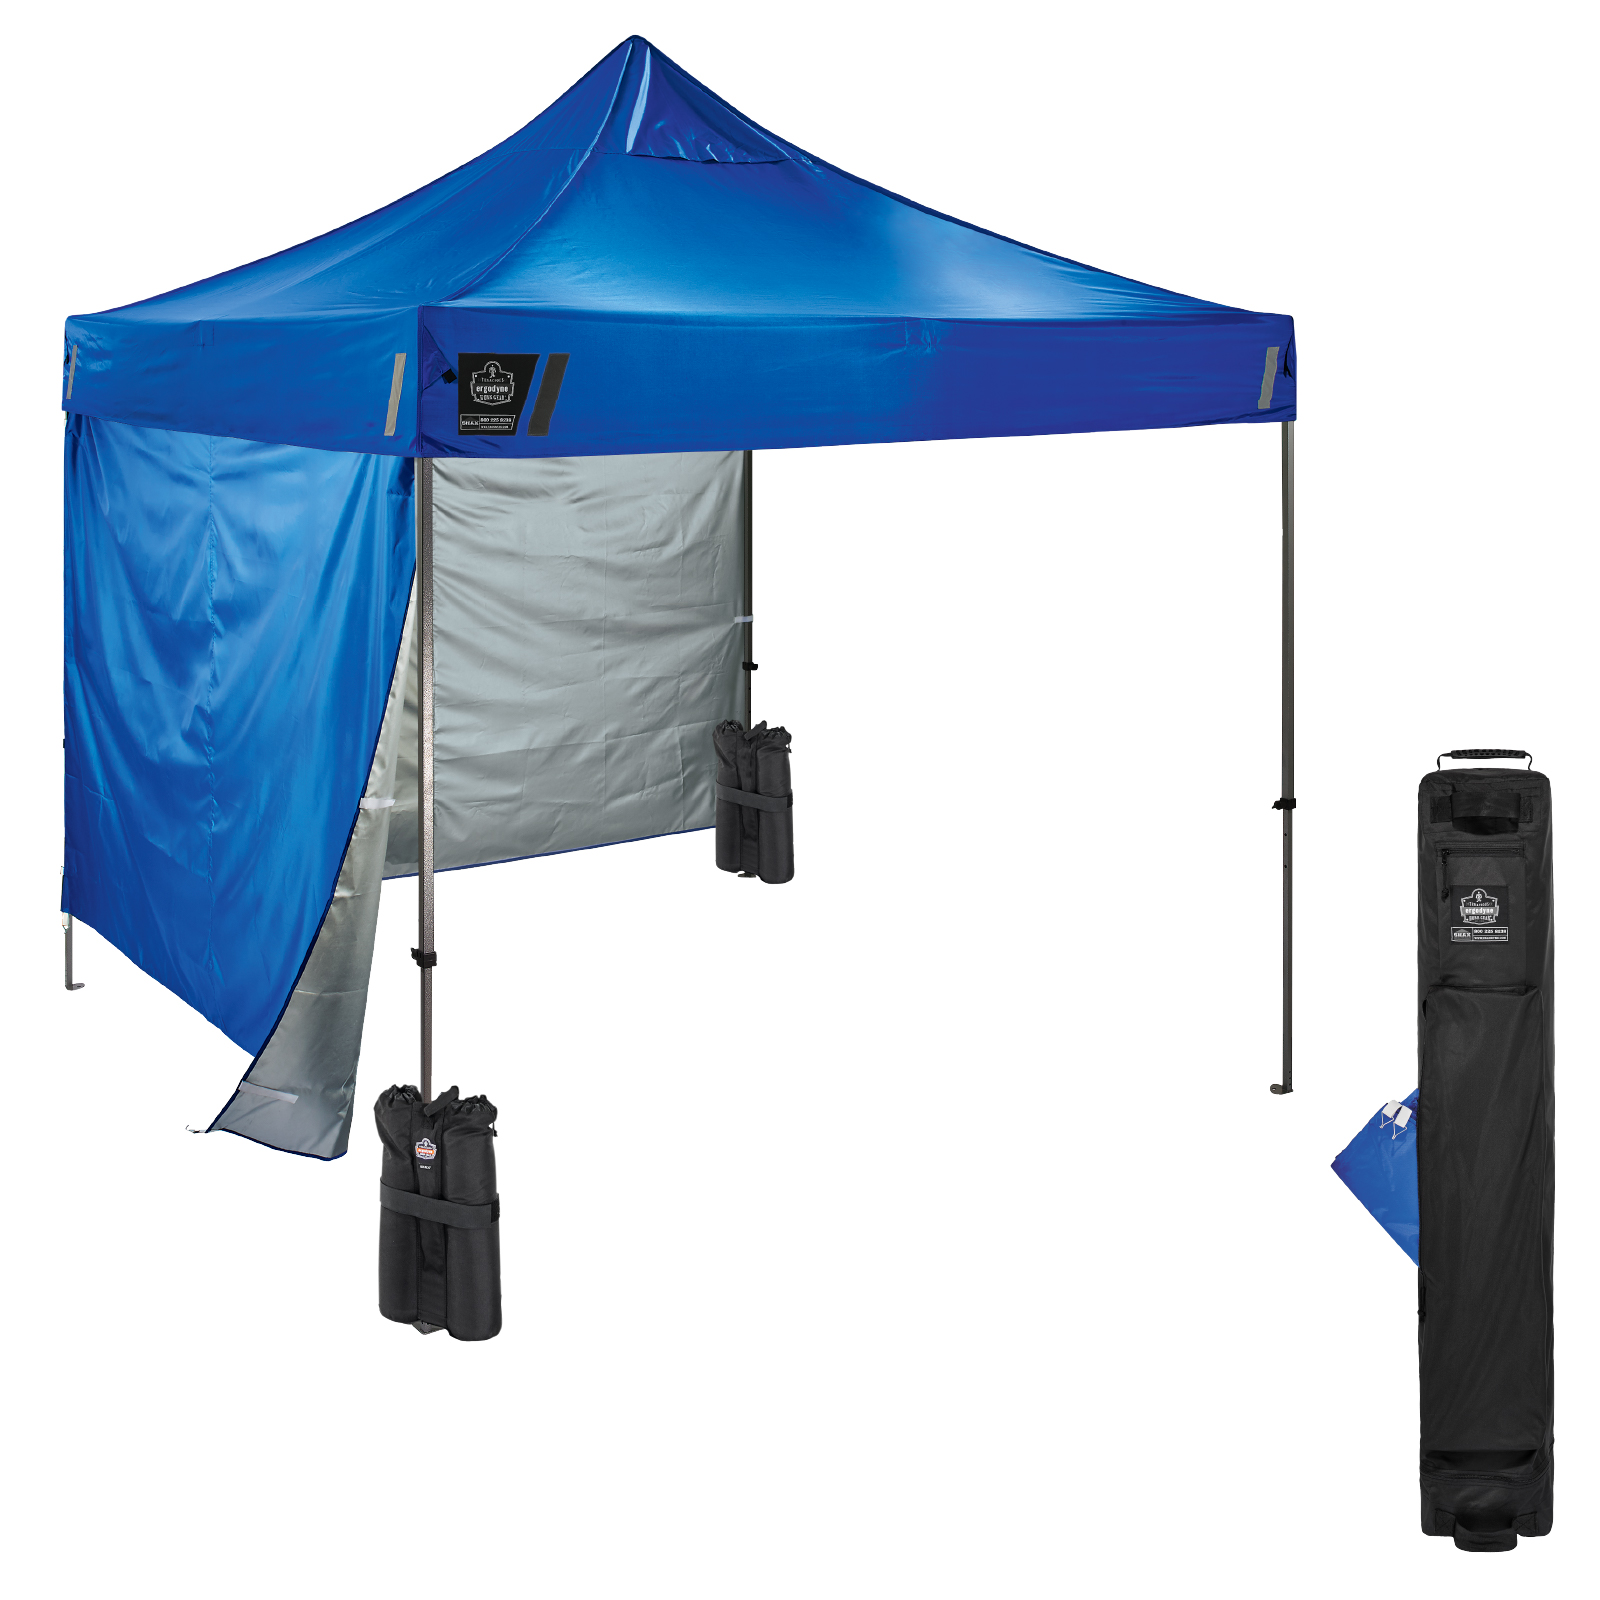 Ergodyne SHAX 6051 Heavy-Duty 10 Foot x 10 Foot Pop-Up Tent from Columbia Safety